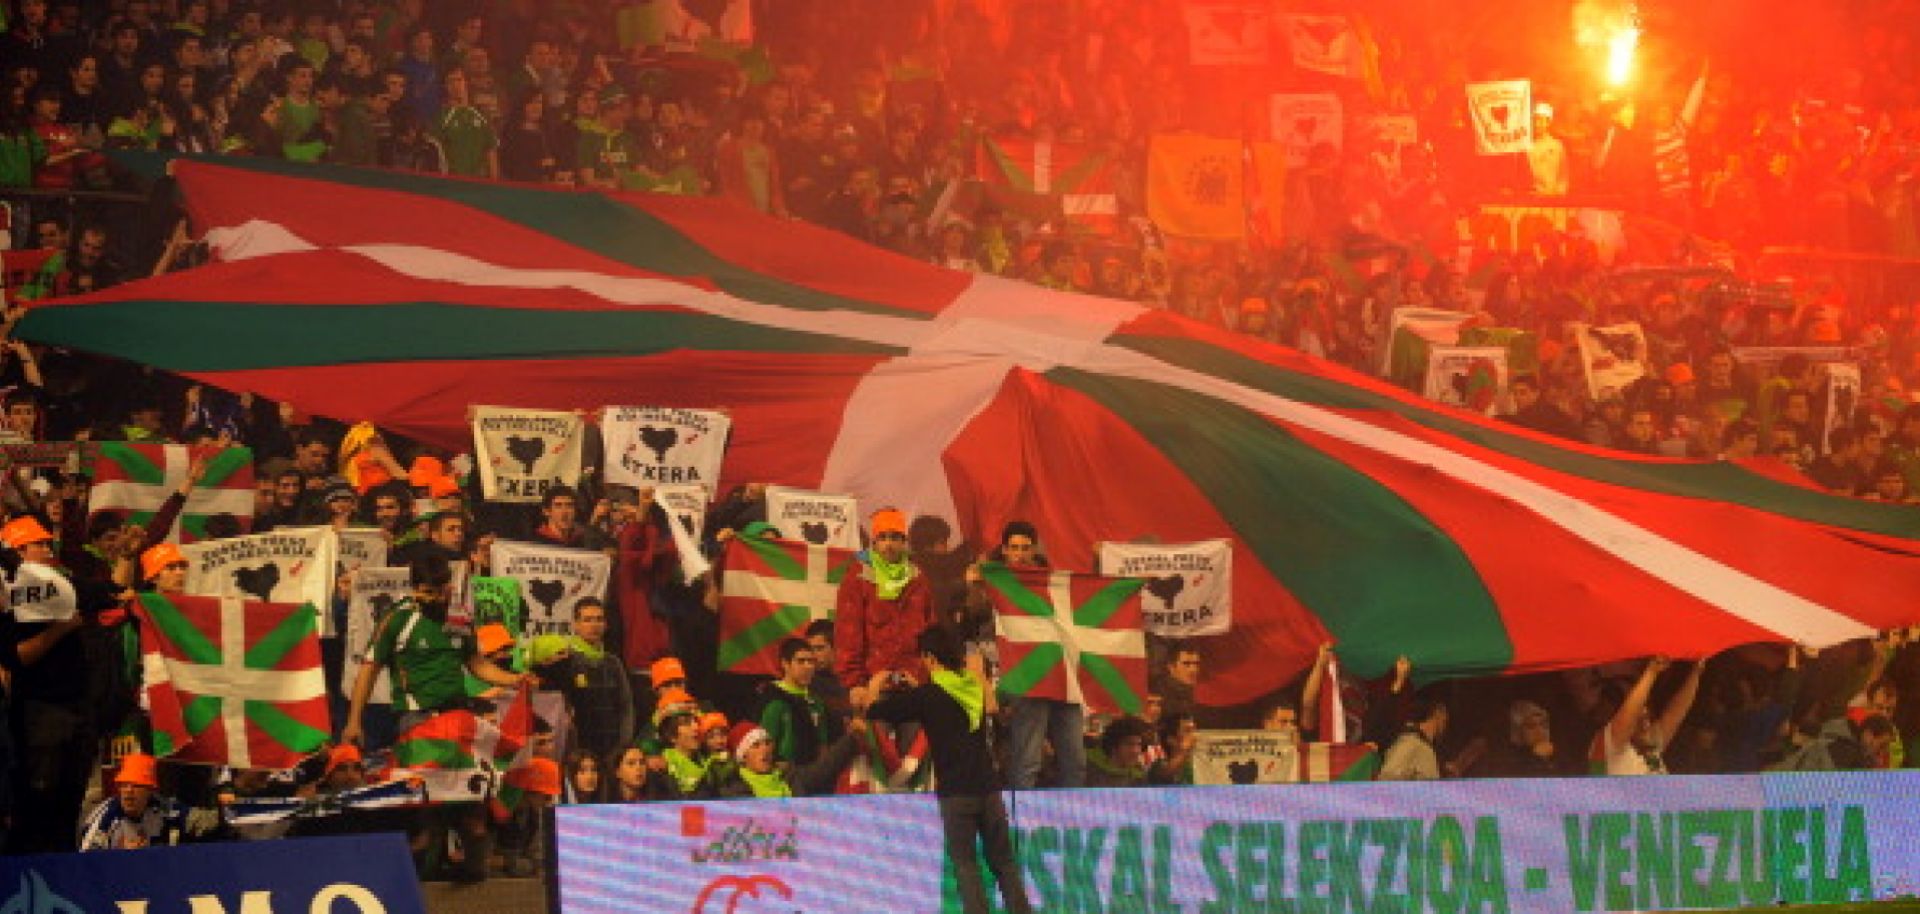 Basque team supporters unfurl an Ikurrina, the region's flag, during a friendly soccer match between the team and the Venezuelan national team in 2010.